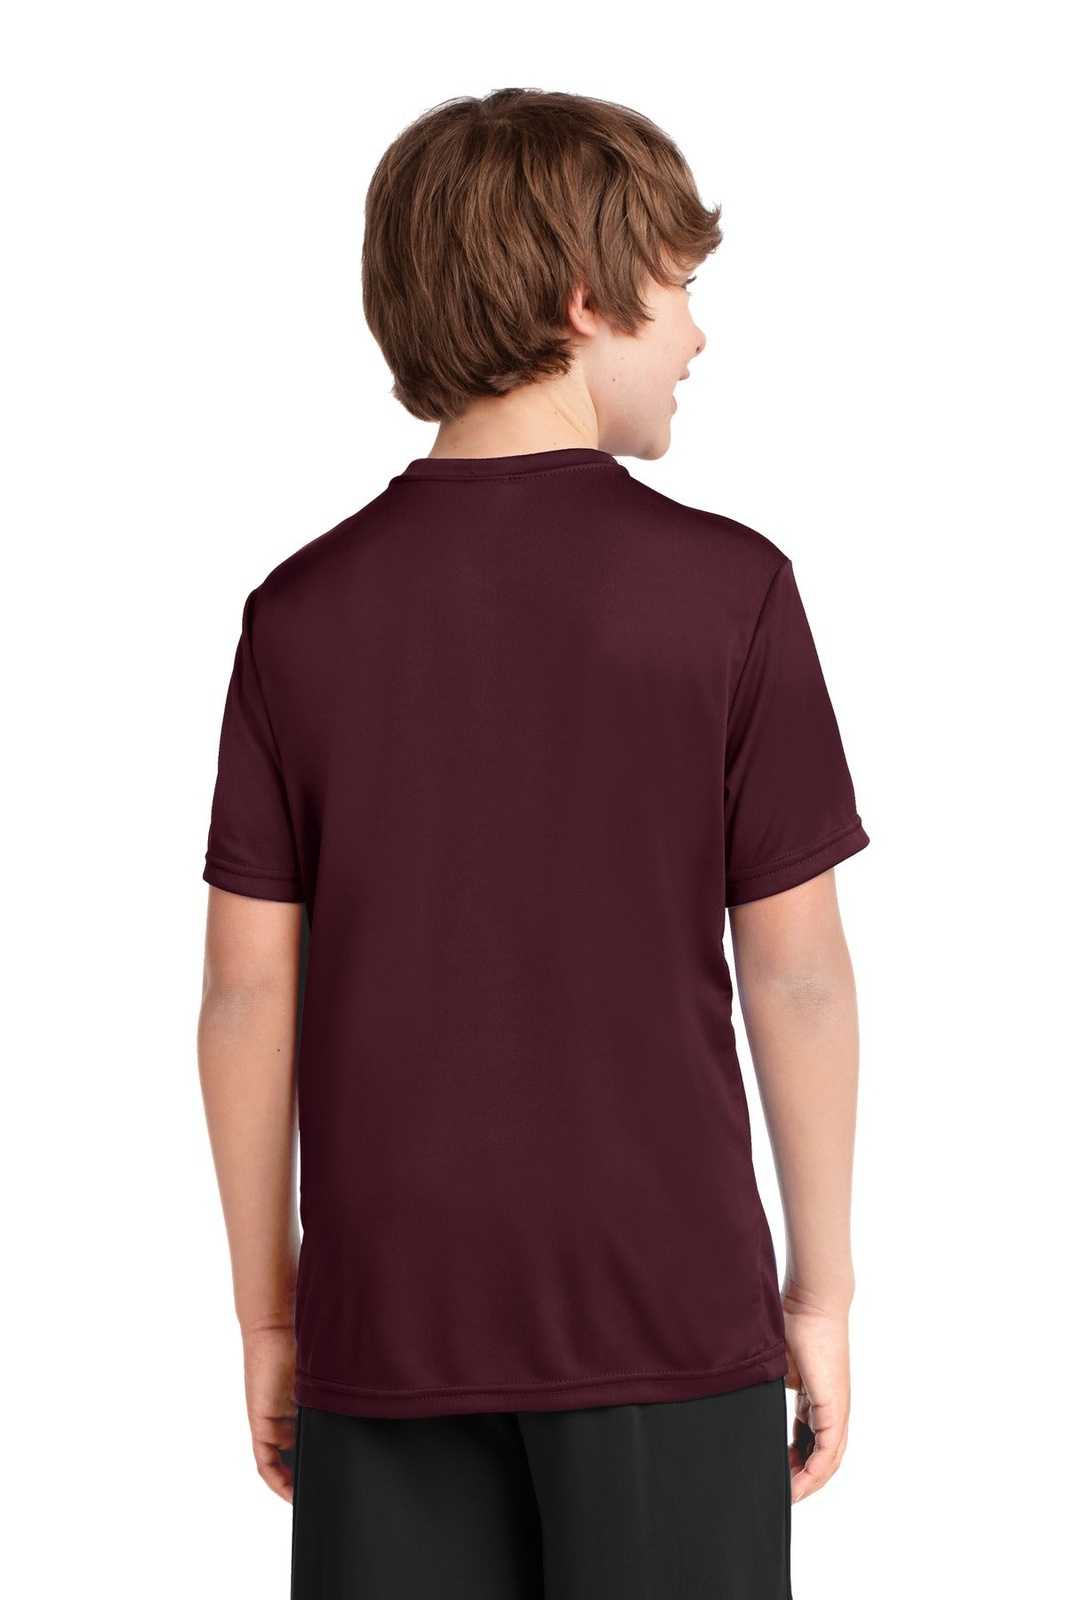 Port &amp; Company PC380Y Youth Performance Tee - Athletic Maroon - HIT a Double - 2